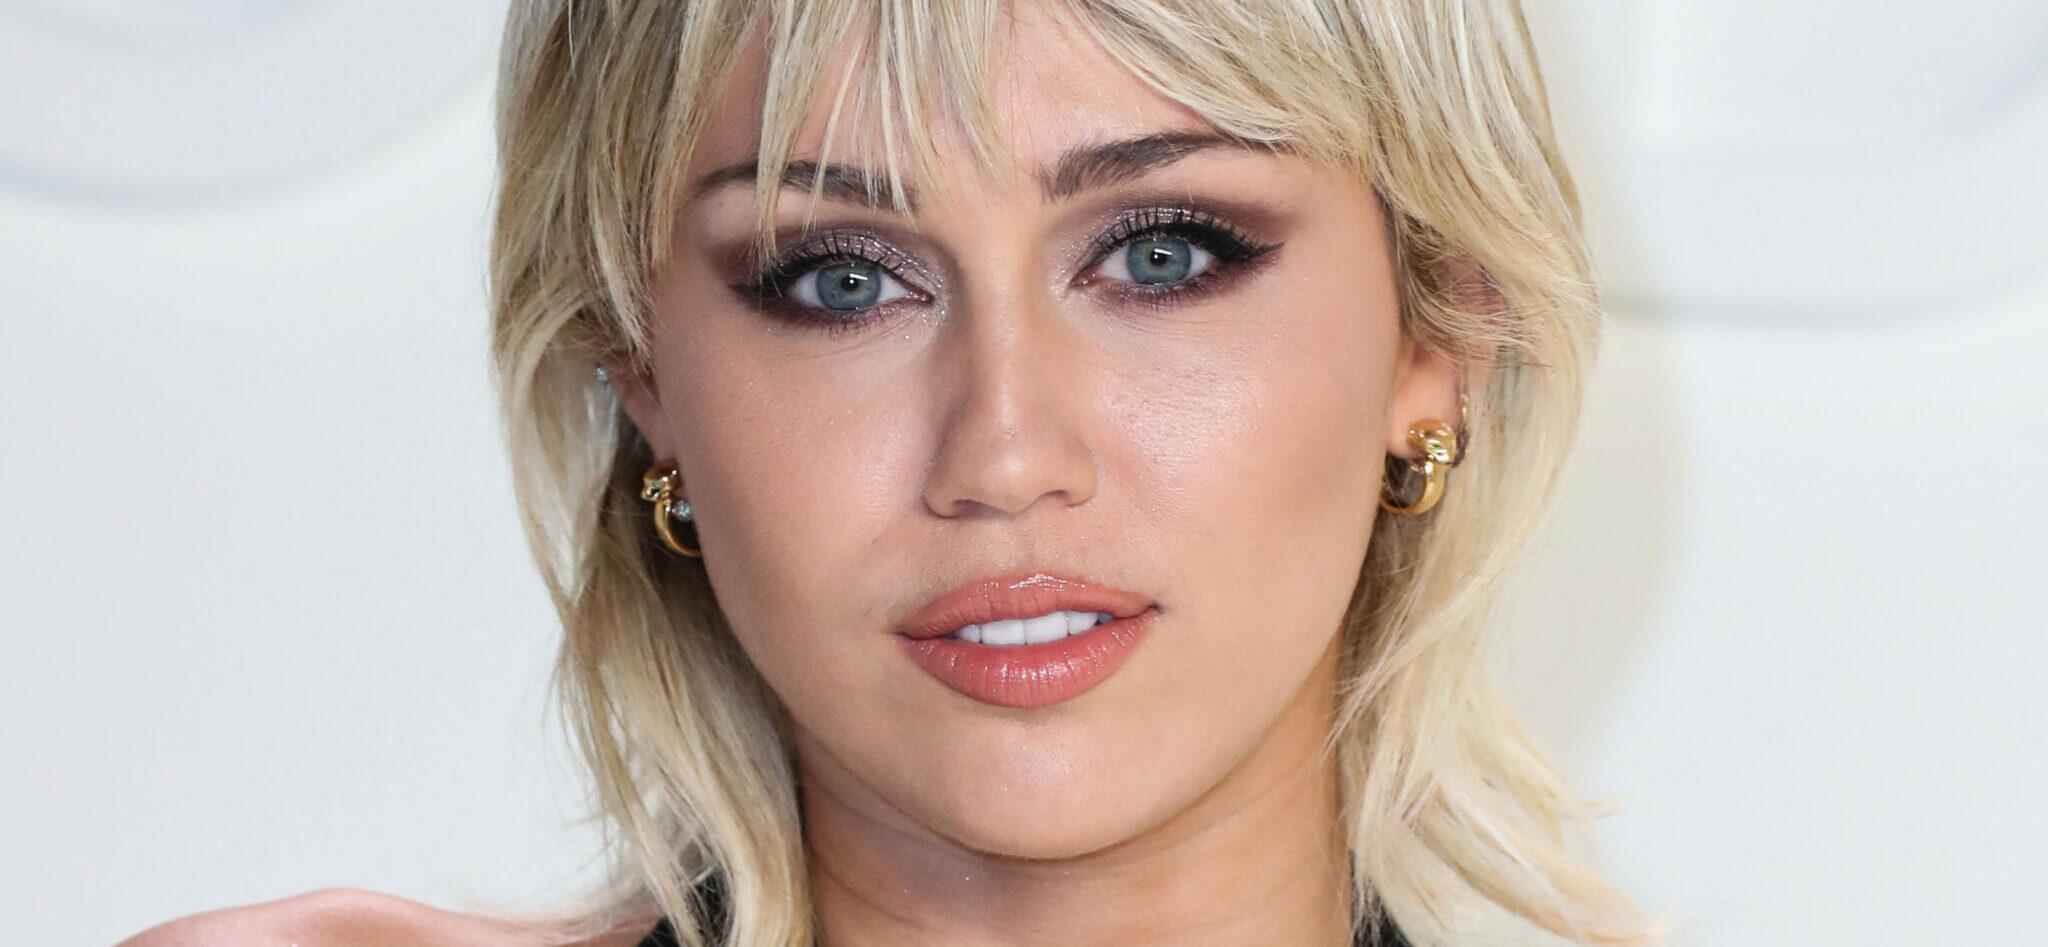 Miley Cyrus Dons Latex Cone Bra In Flirty Promo For Her New Single